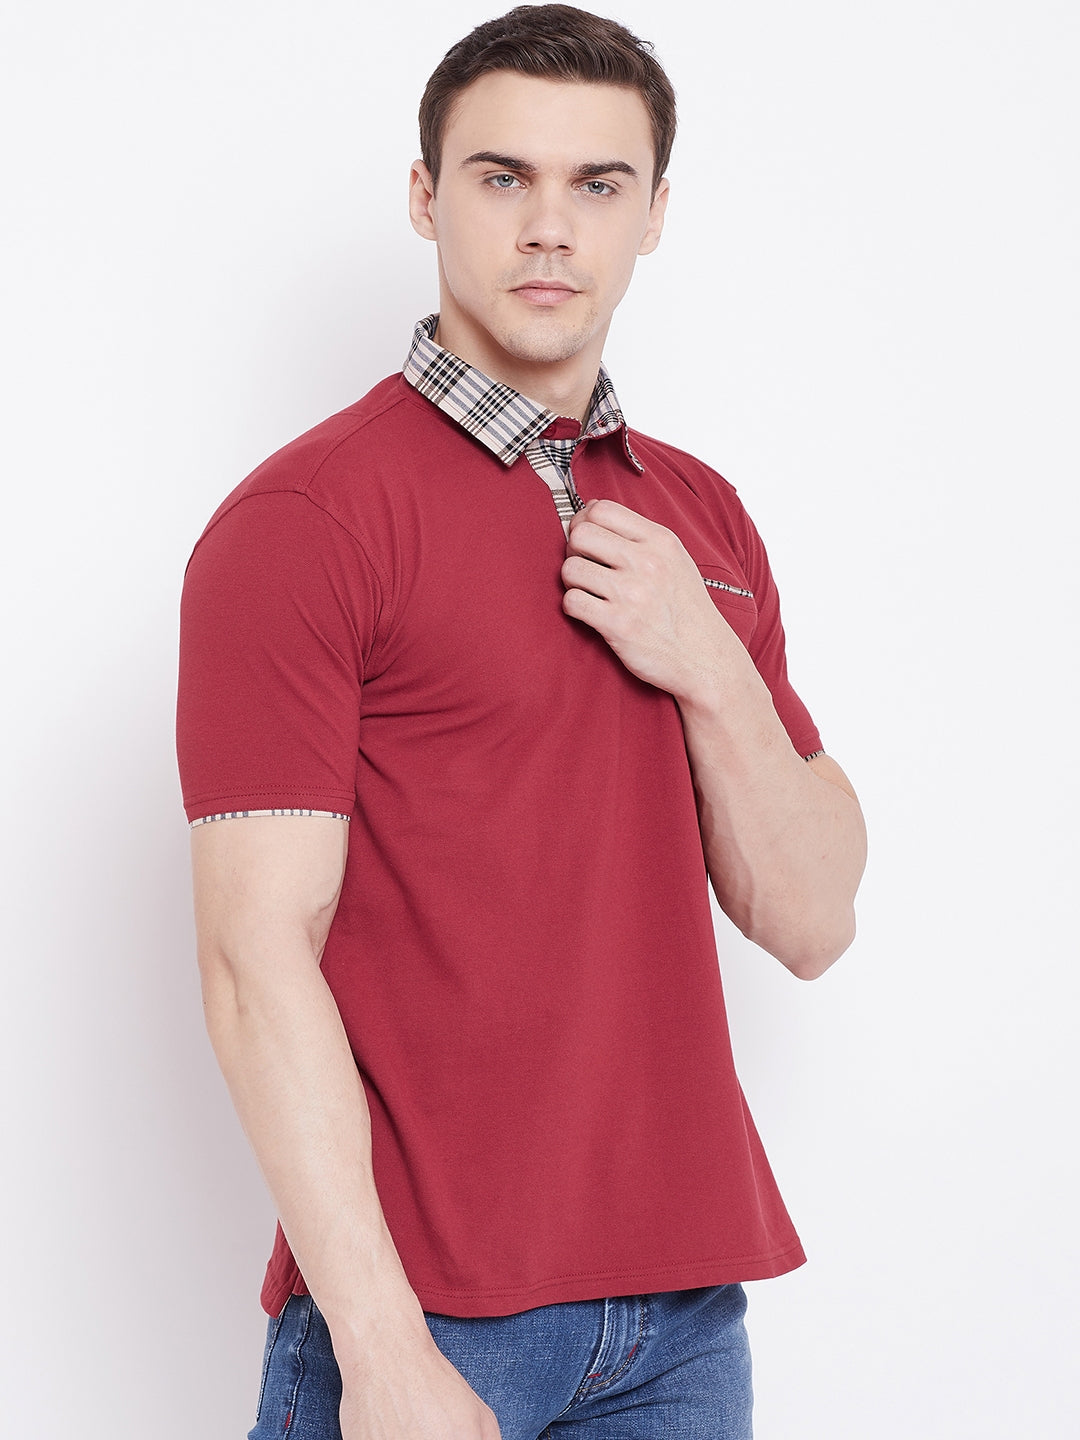 JUMP USA Men Red Solid Polo T-shirts - JUMP USA